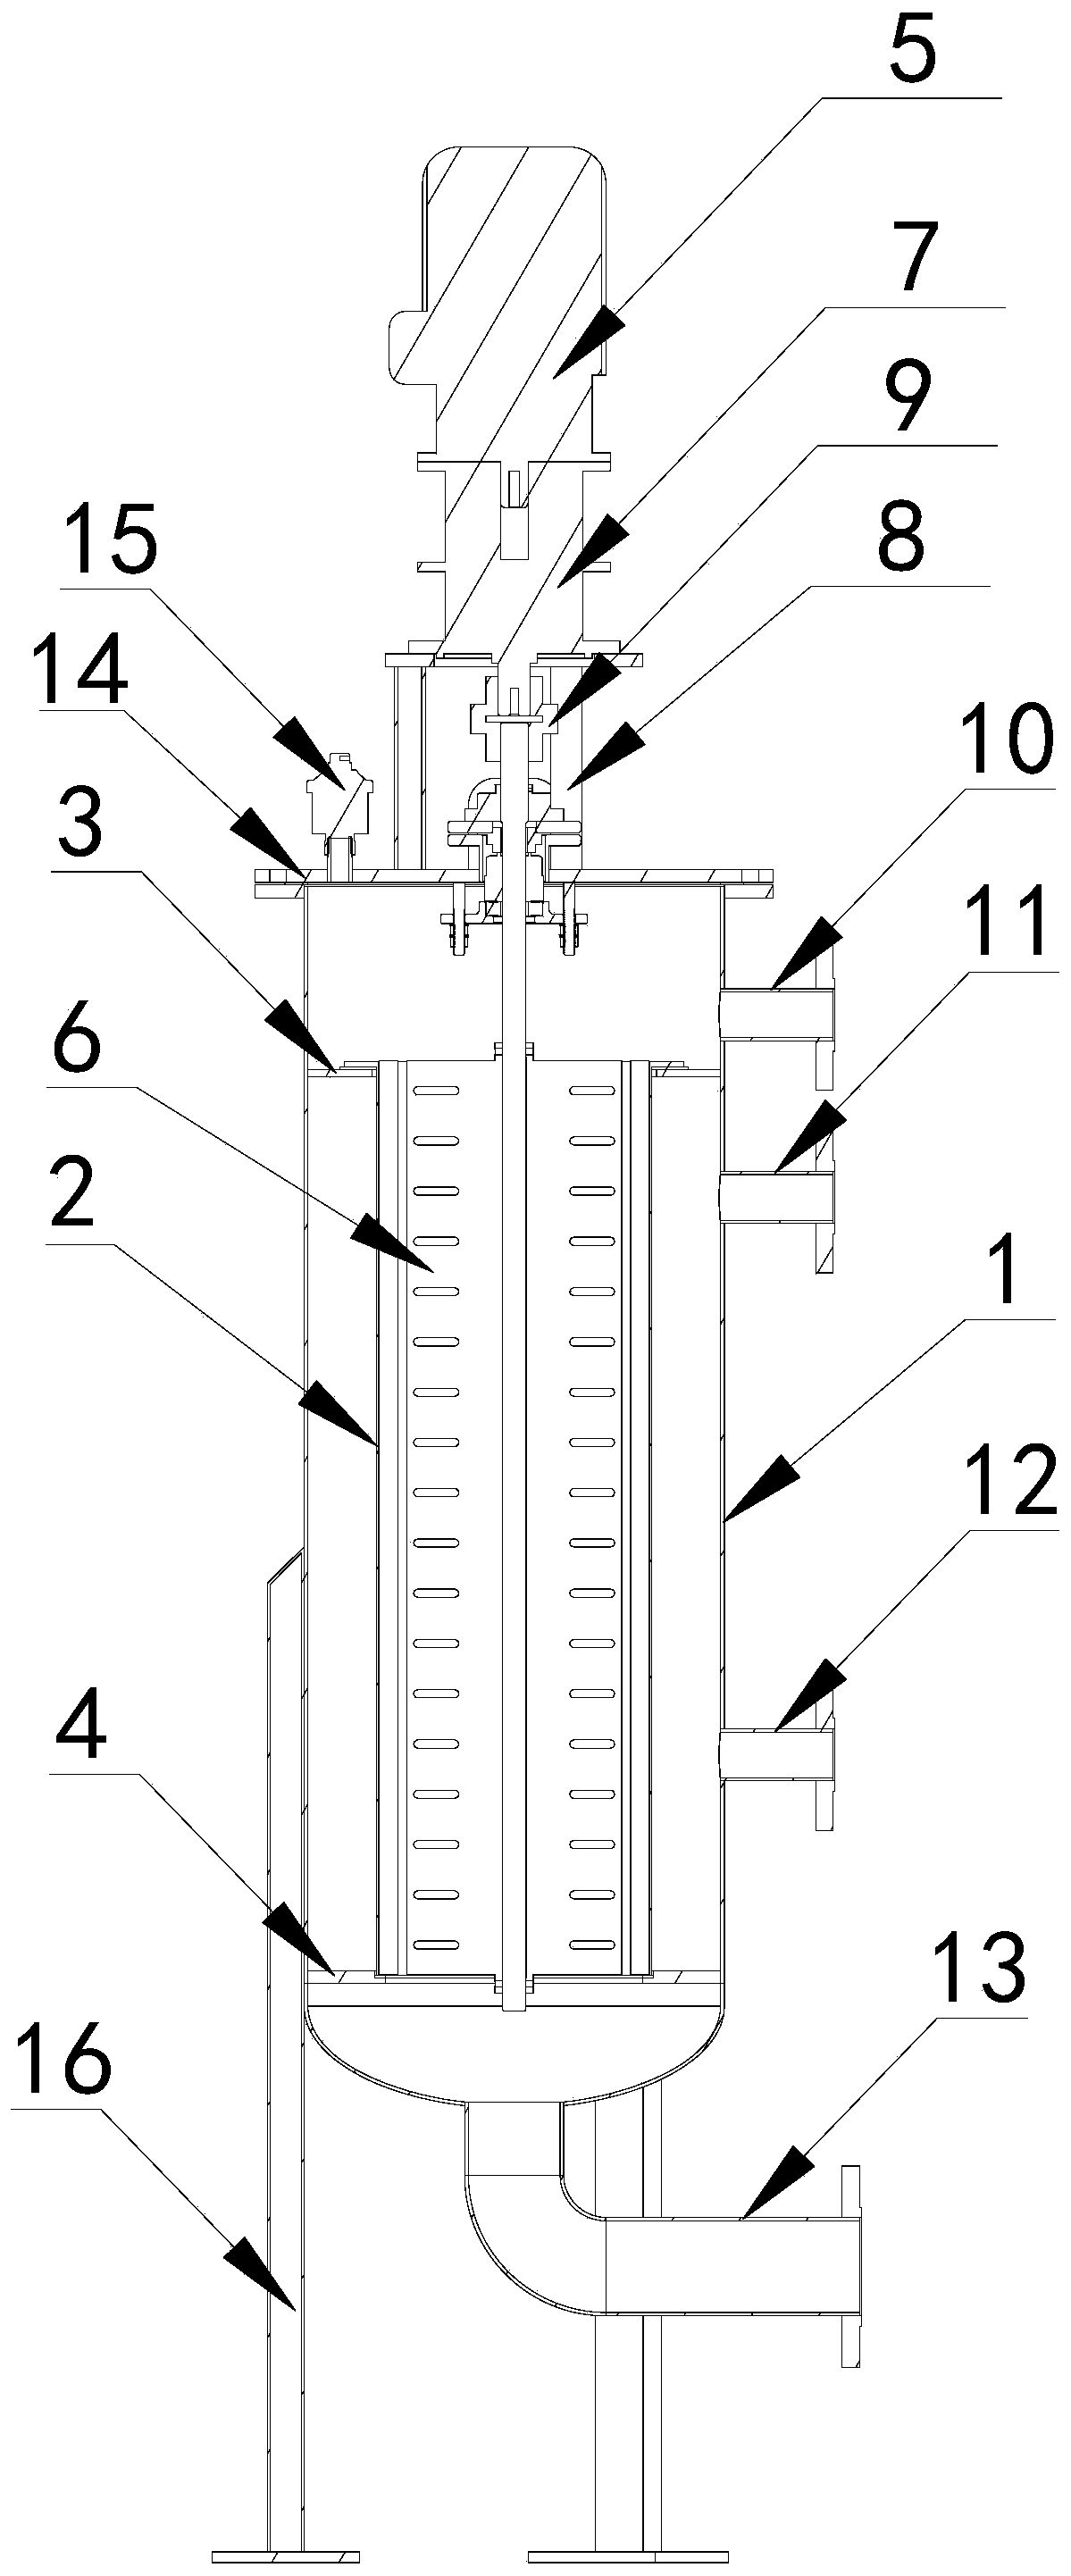 Stirring and filtering device for circulating pulp used in papermaking through glass fibers